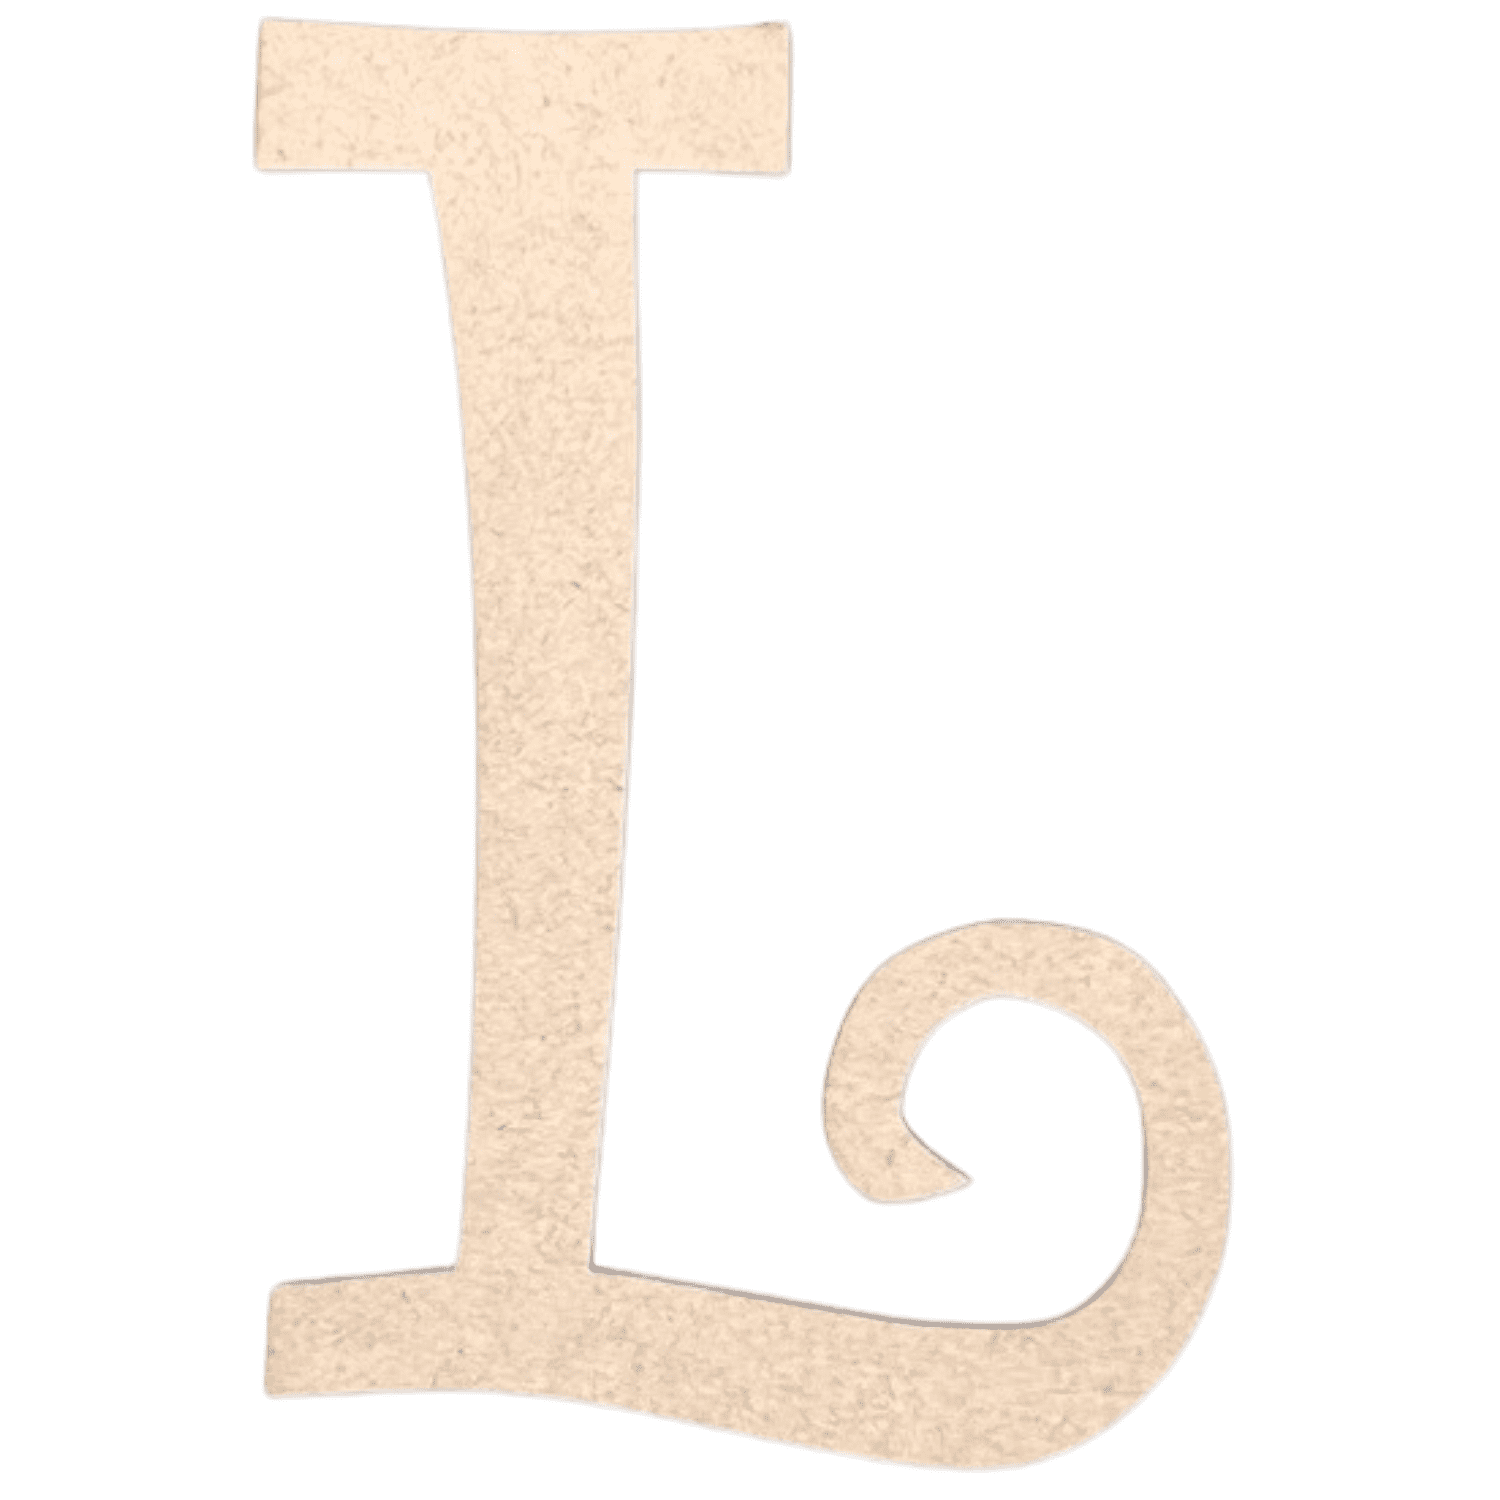 50 Mix Medium Wooden Letter Shapes 3mm-6mm Thick 8-15cm Size 1/8 Inch  Thickness 1-6 Inch Size 